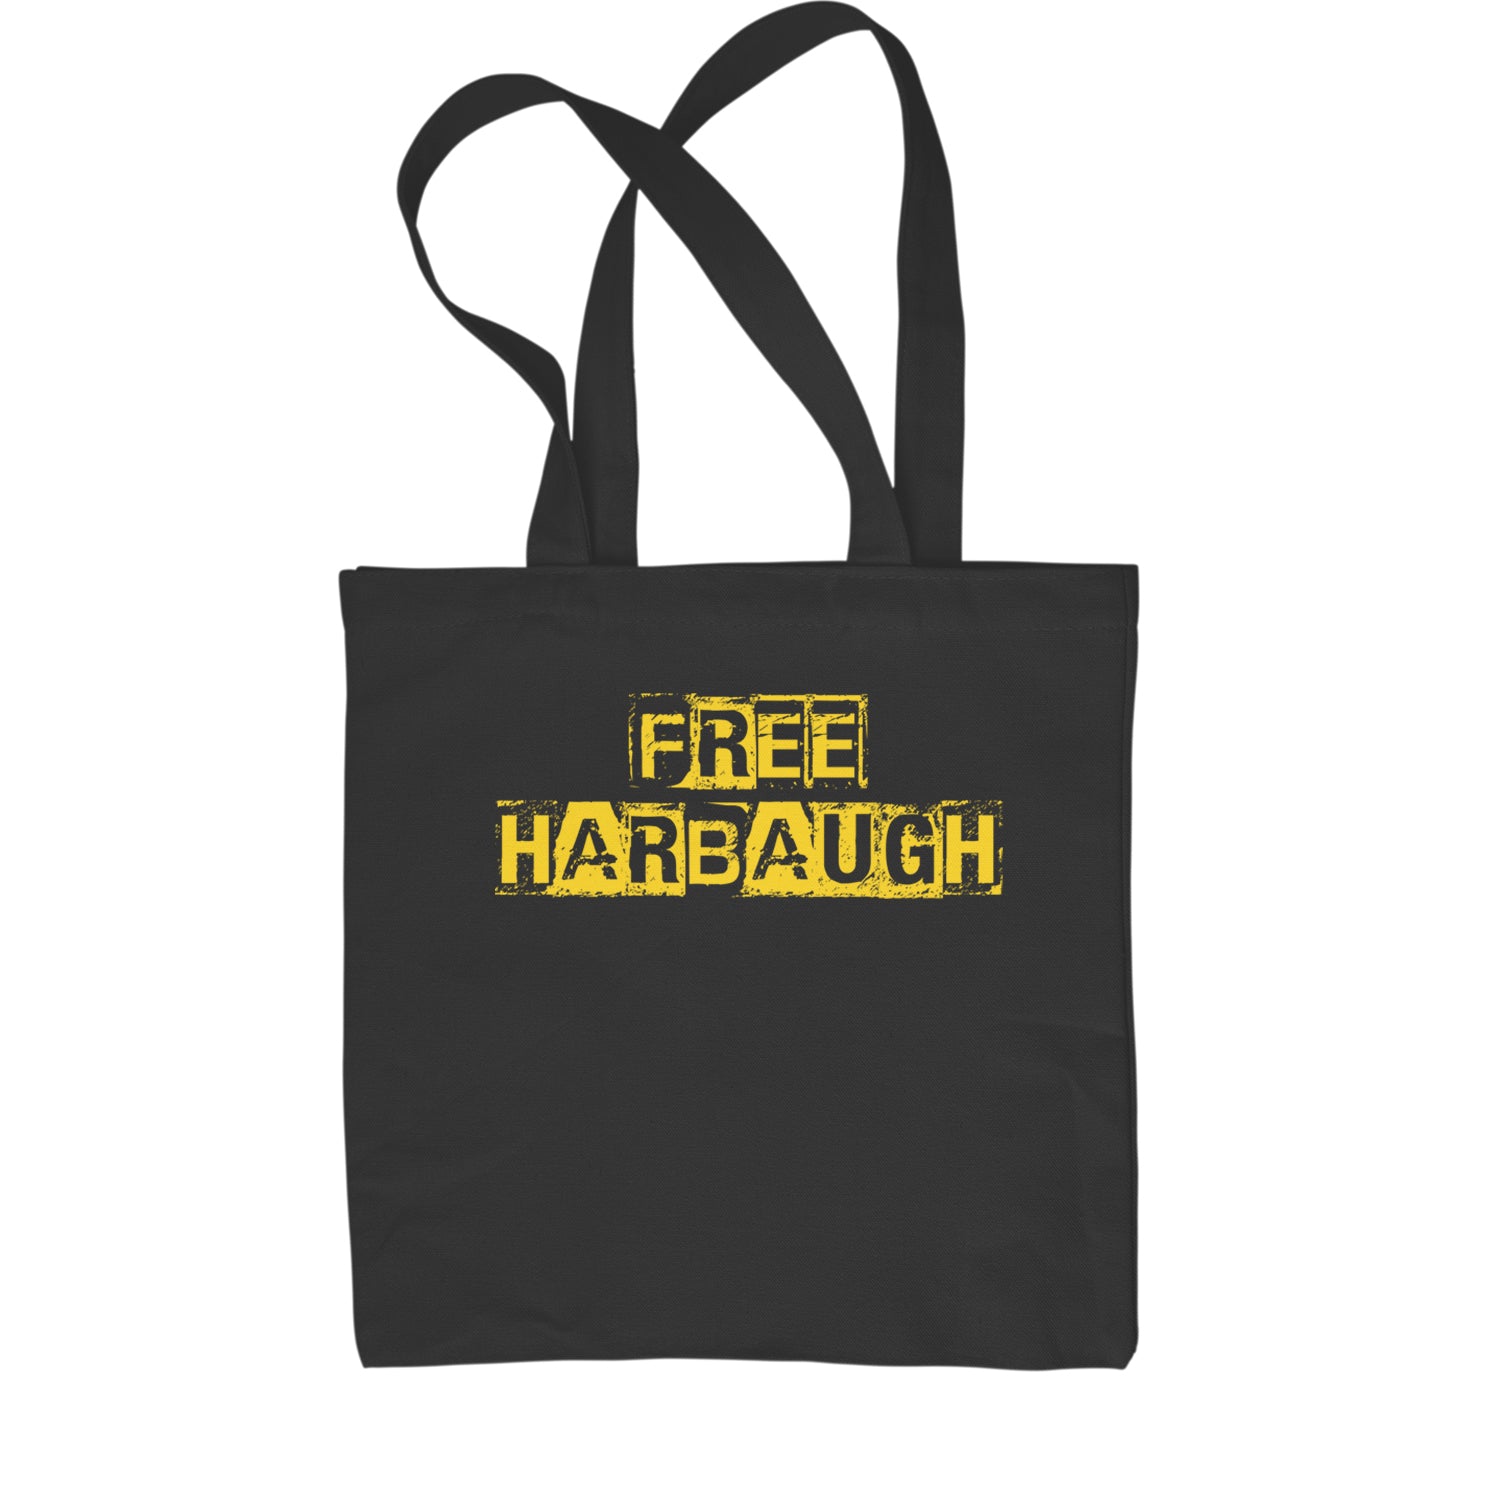 Free Harbaugh Release Our Coach Shopping Tote Bag